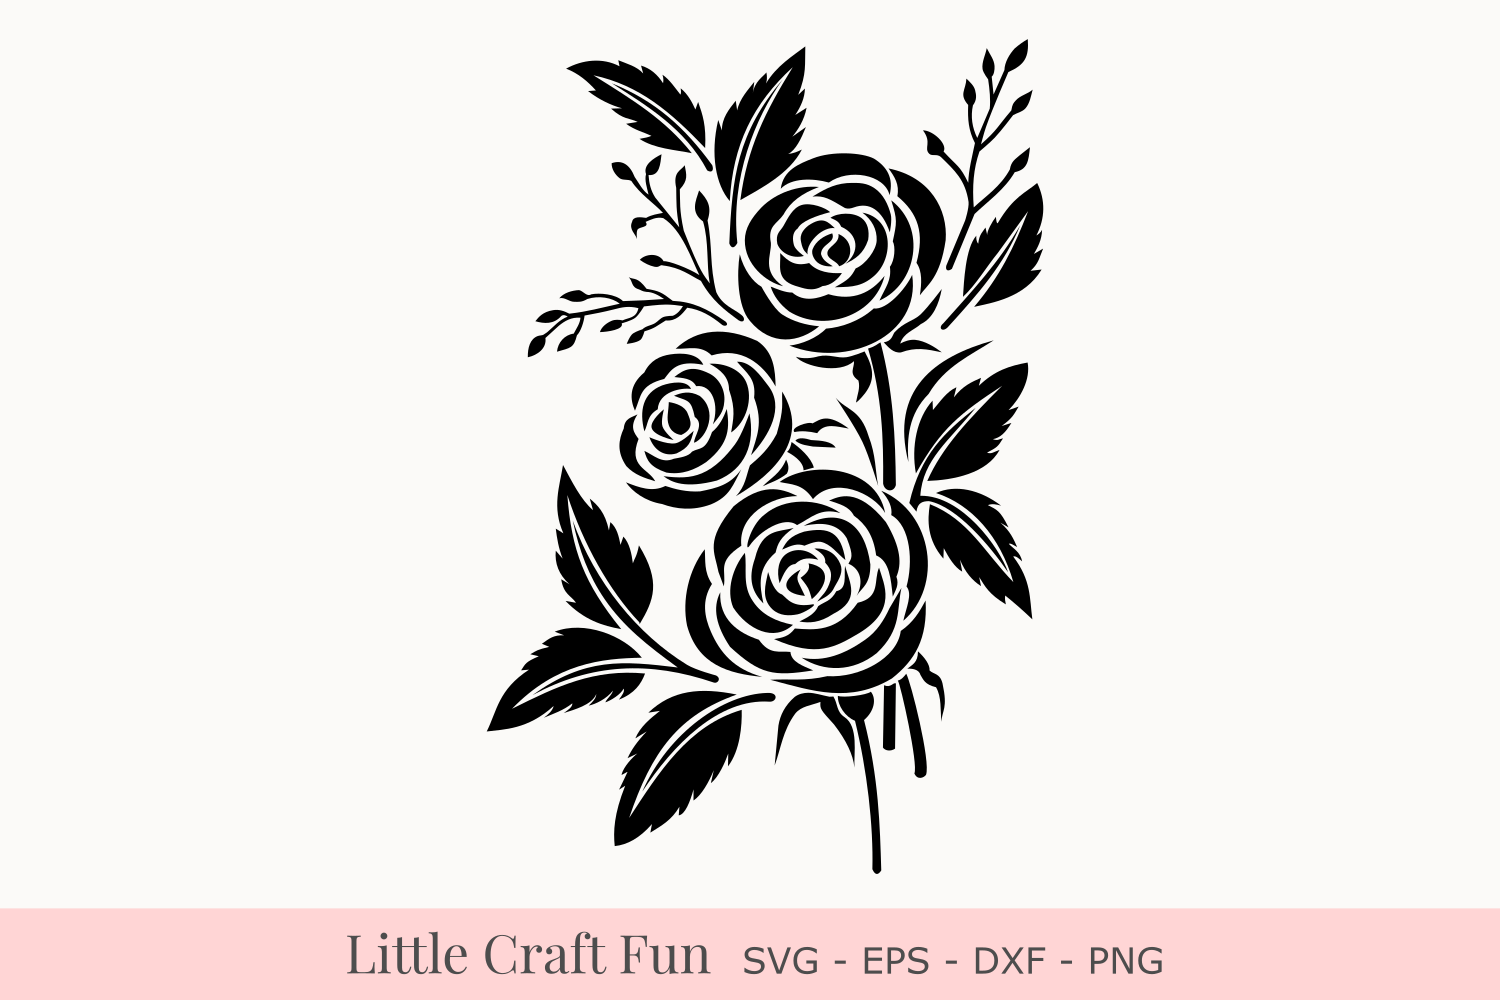 Rose Flowers Silhouette Svg, Rose Florals Silhouette